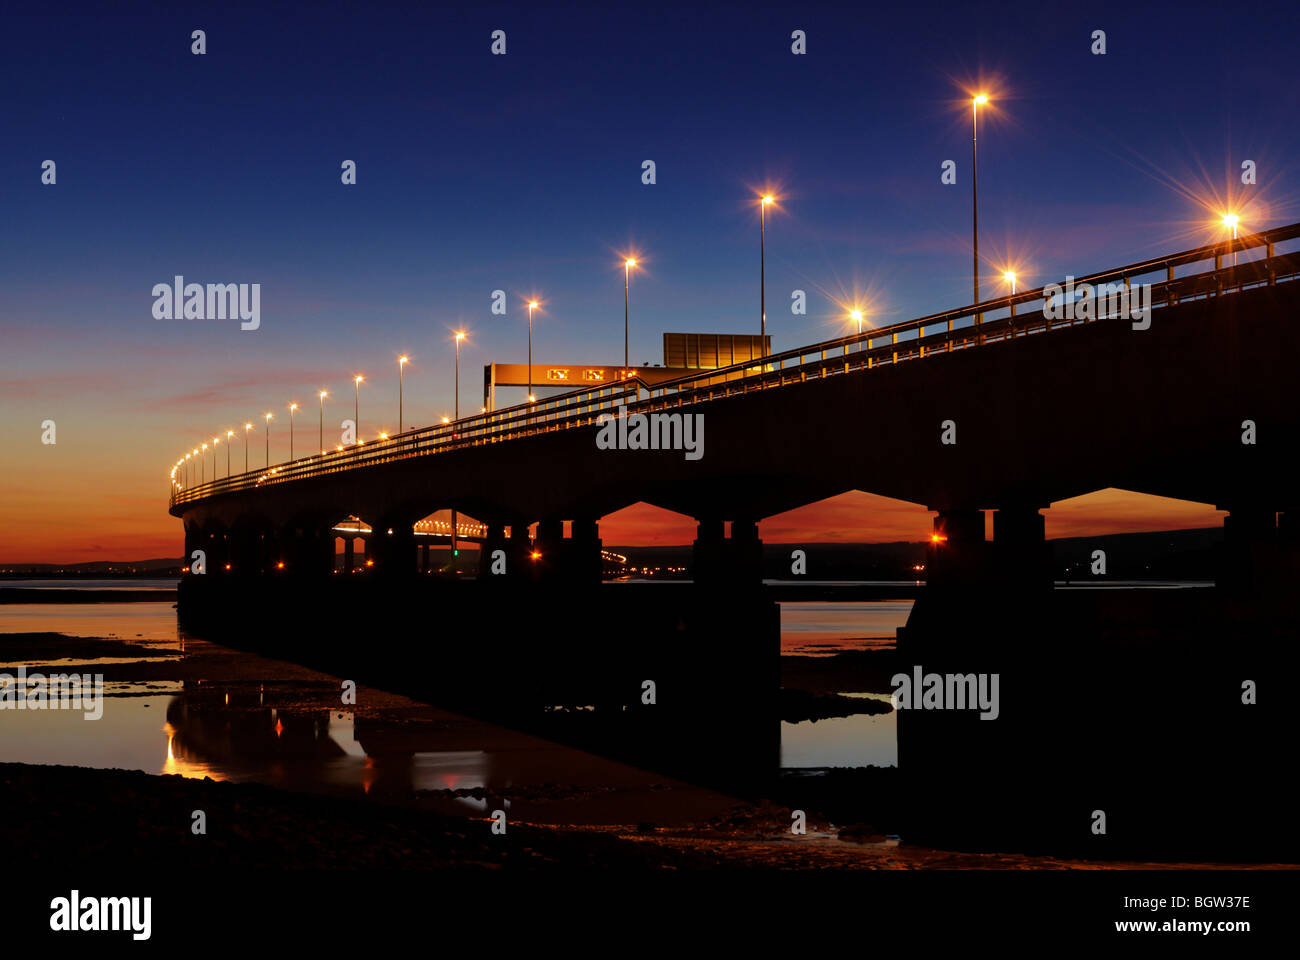 Low tide view of the second Severn crossing at dusk with the lights of the M4 motorway lit up Stock Photo